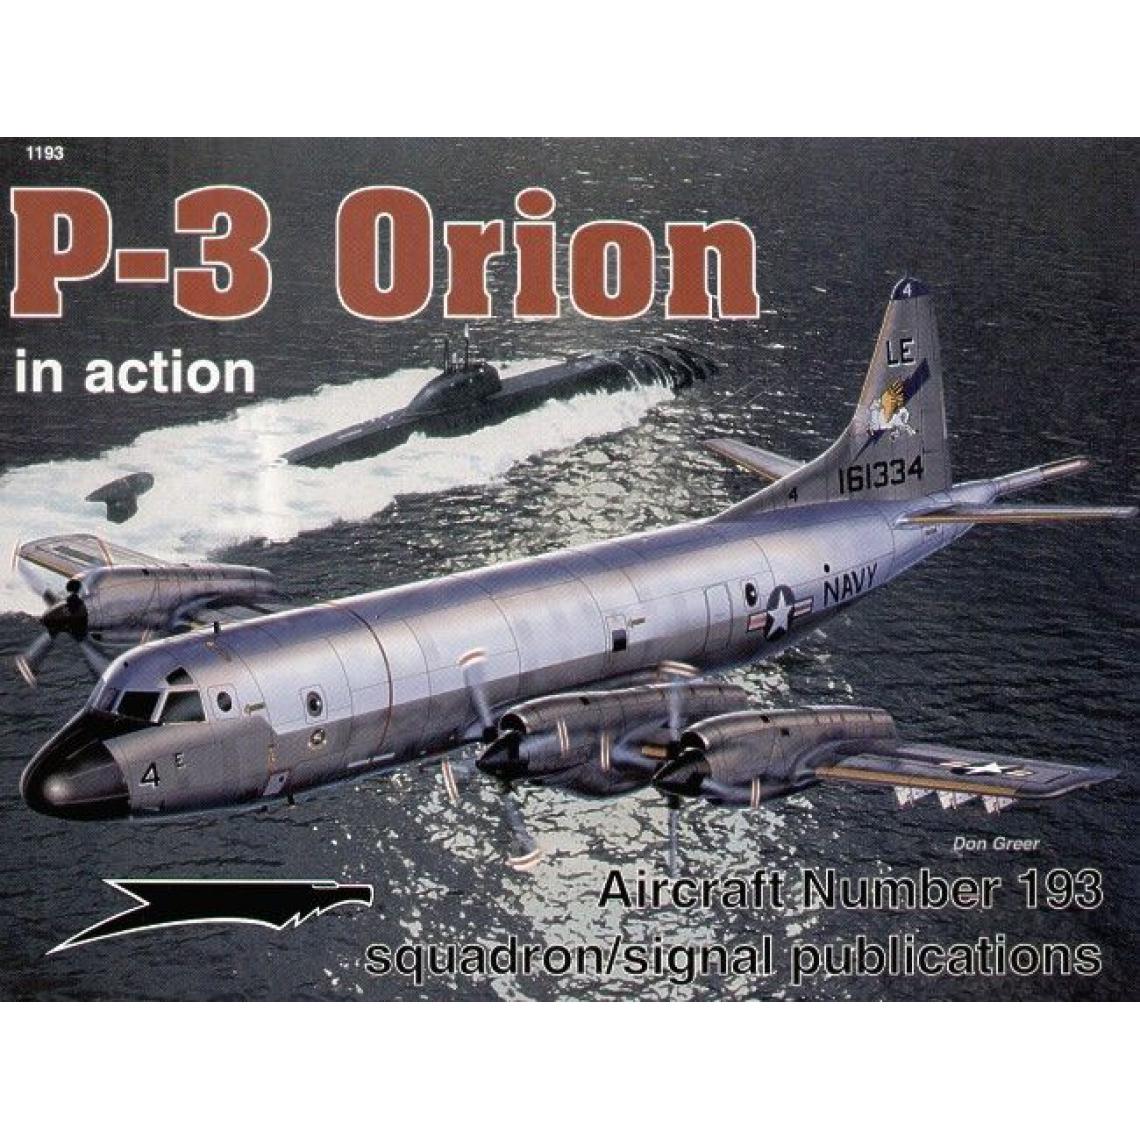 Inconnu - Livre Lockheed P-3 Orion (In Action Series) - Accessoires maquettes